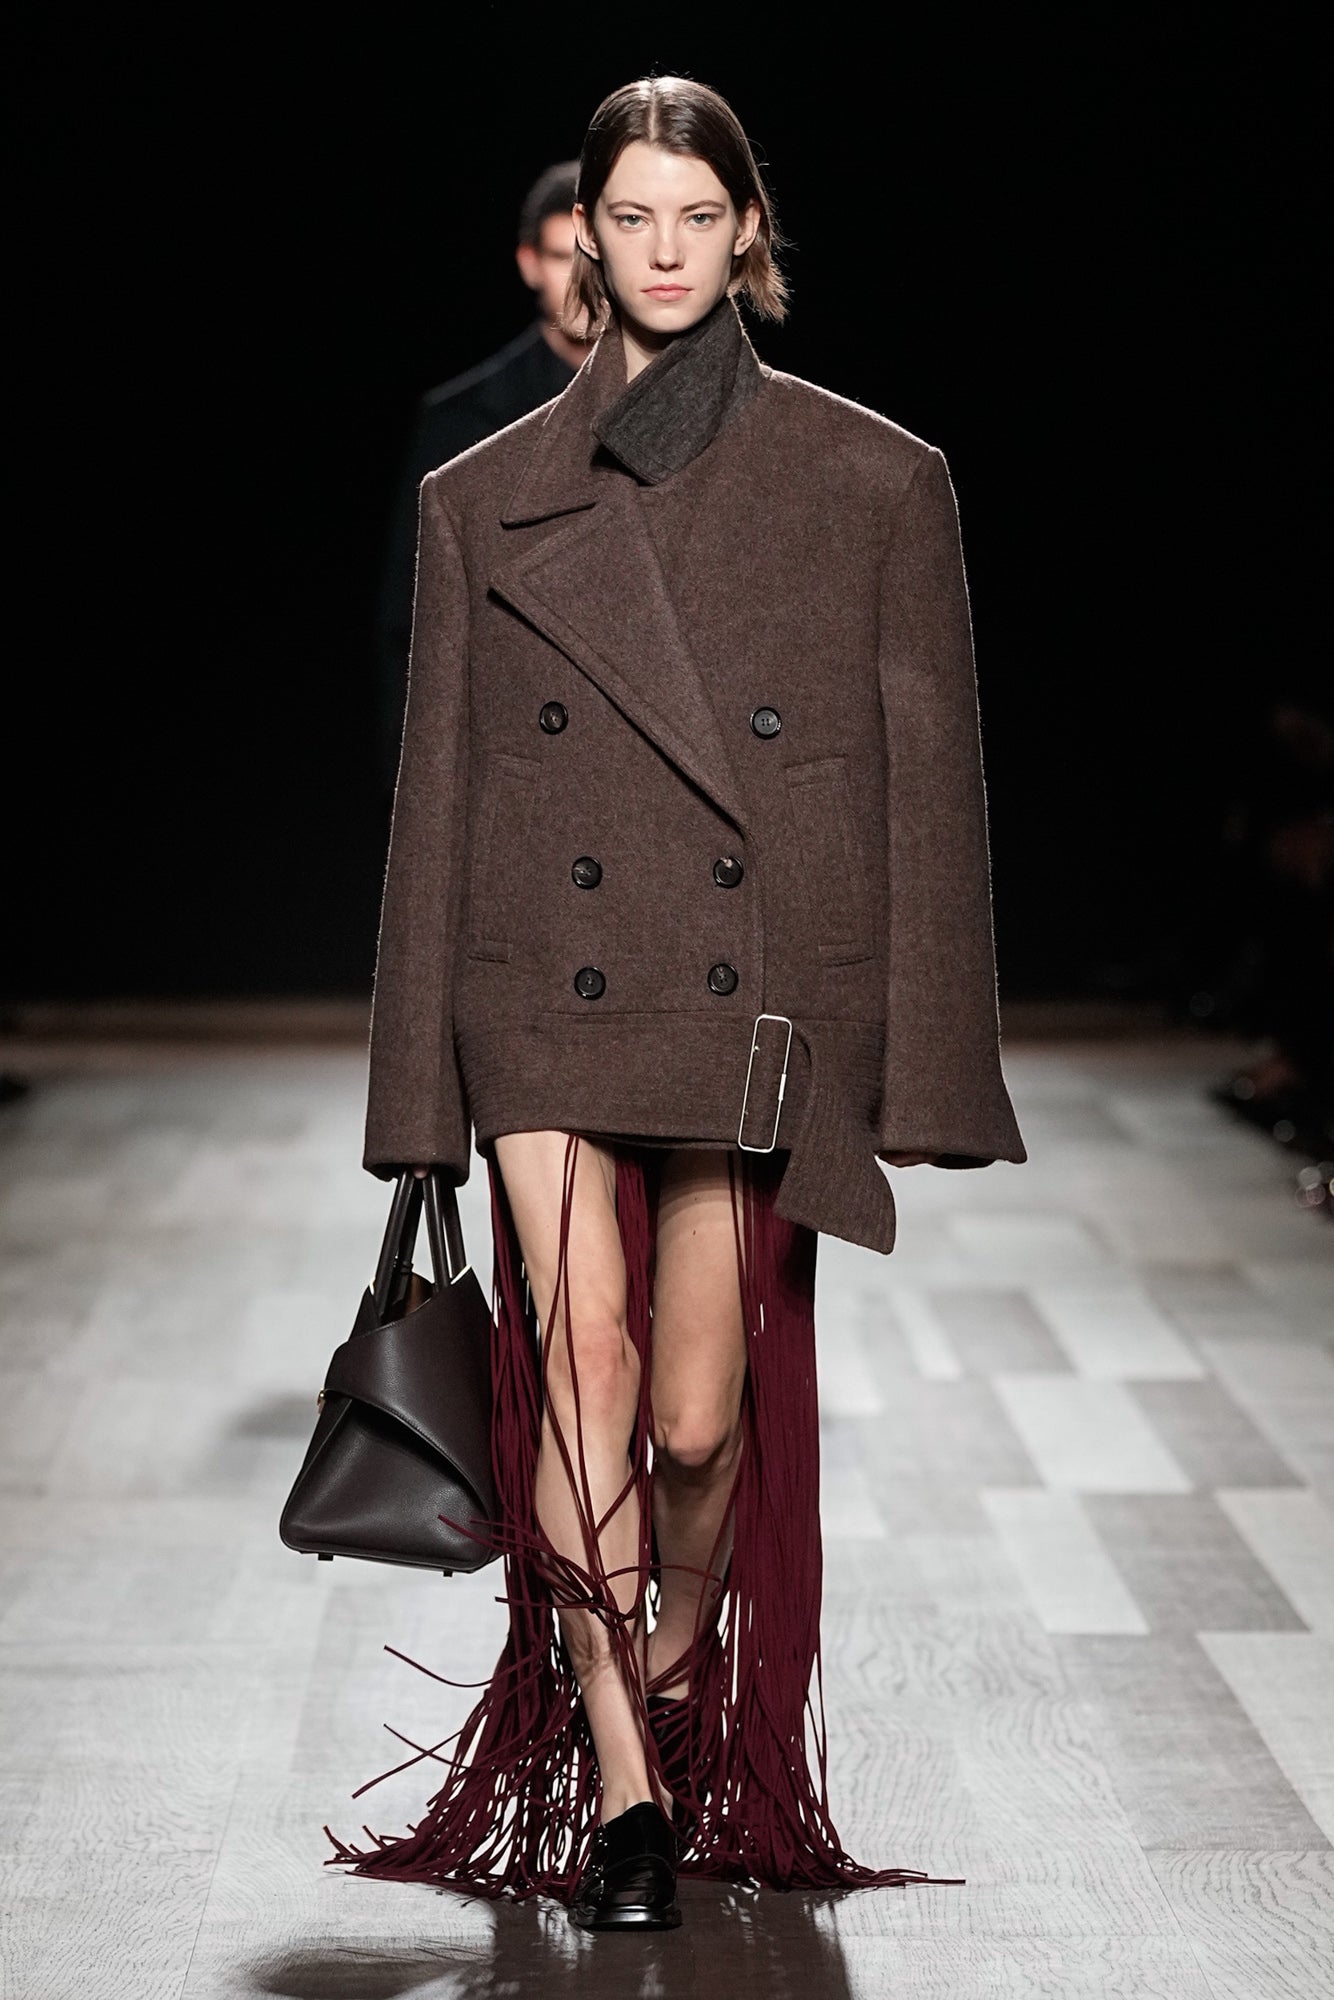 milan fashion week: the 6 key trends you’ll want to wear next winter